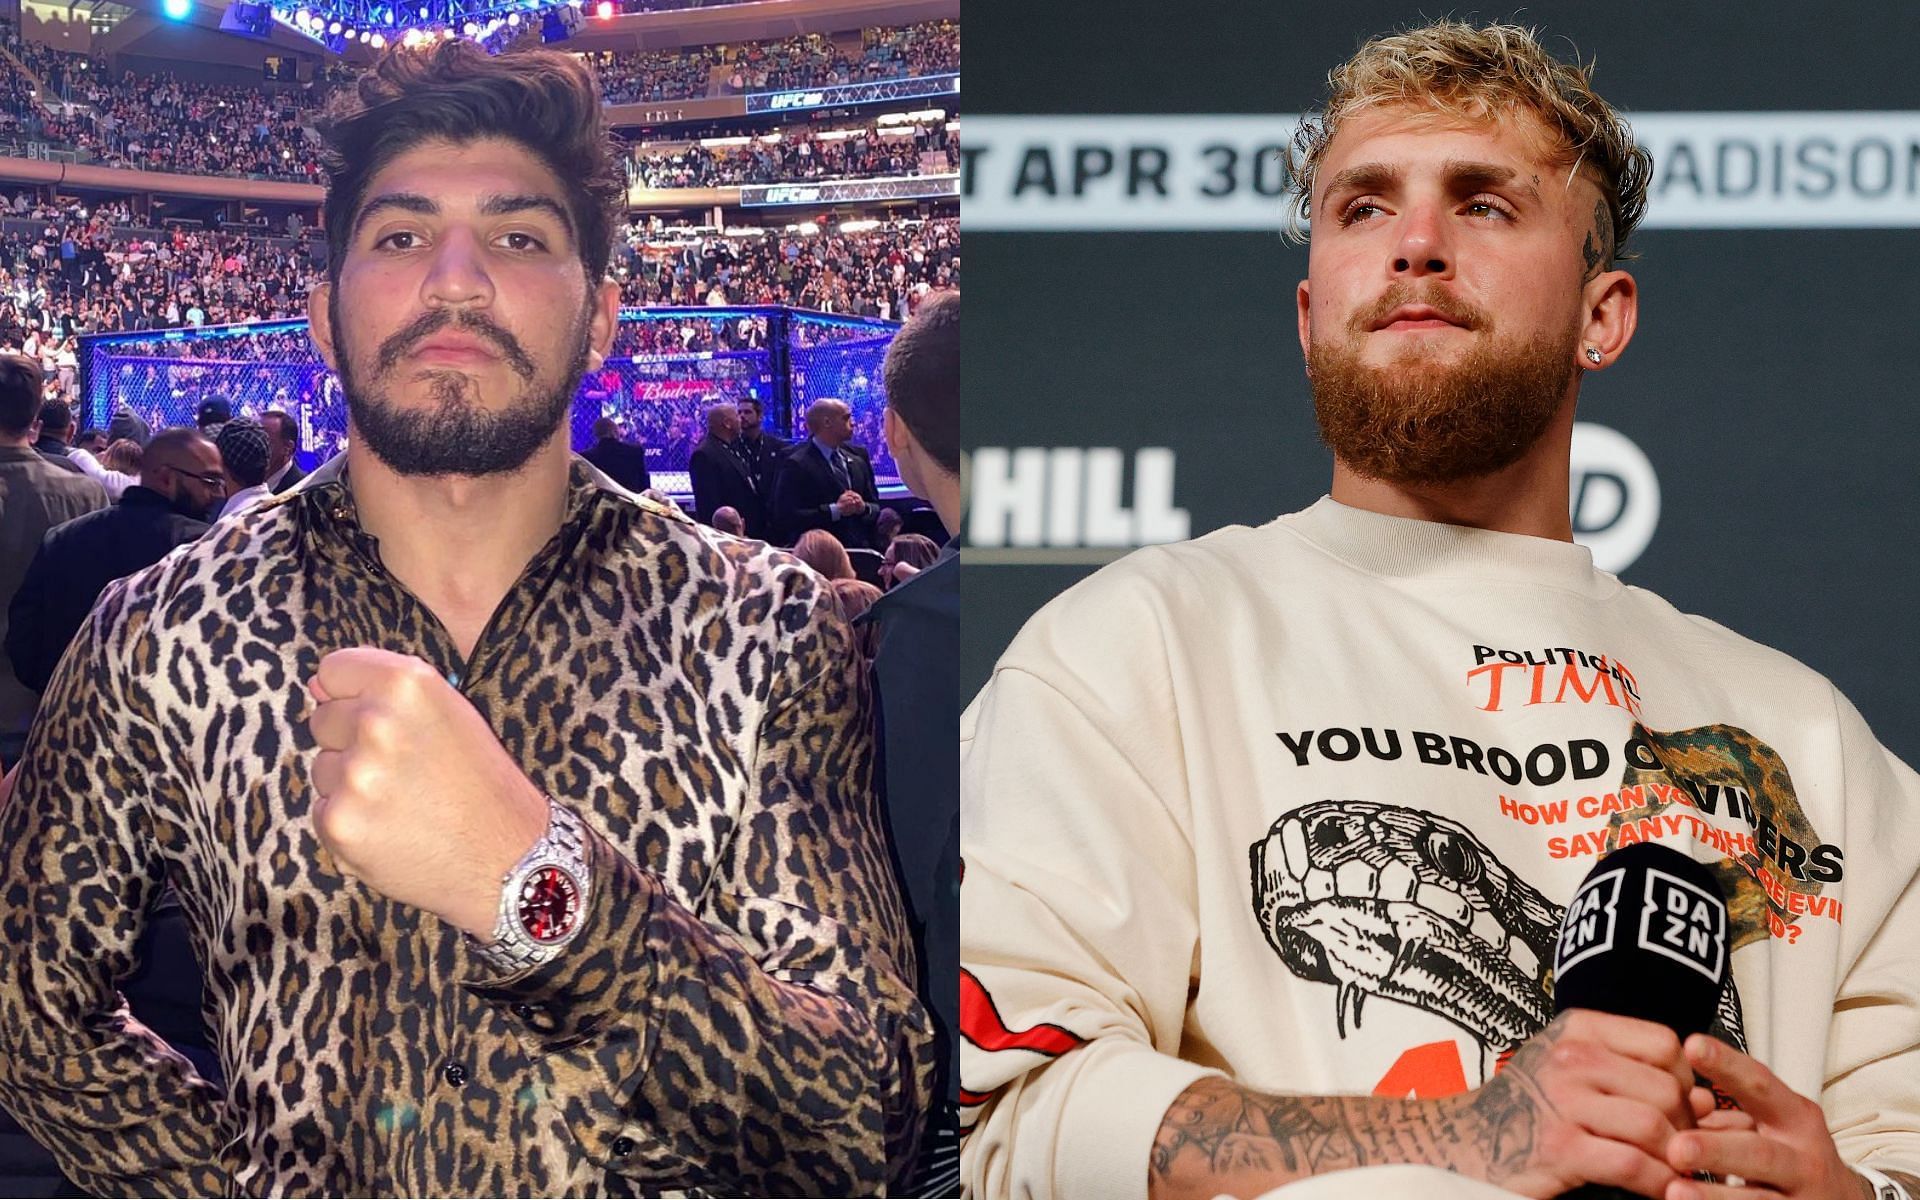 Dillon Danis (left) and Jake Paul (right) (Images via Instagram/@DillonDanis and Getty)